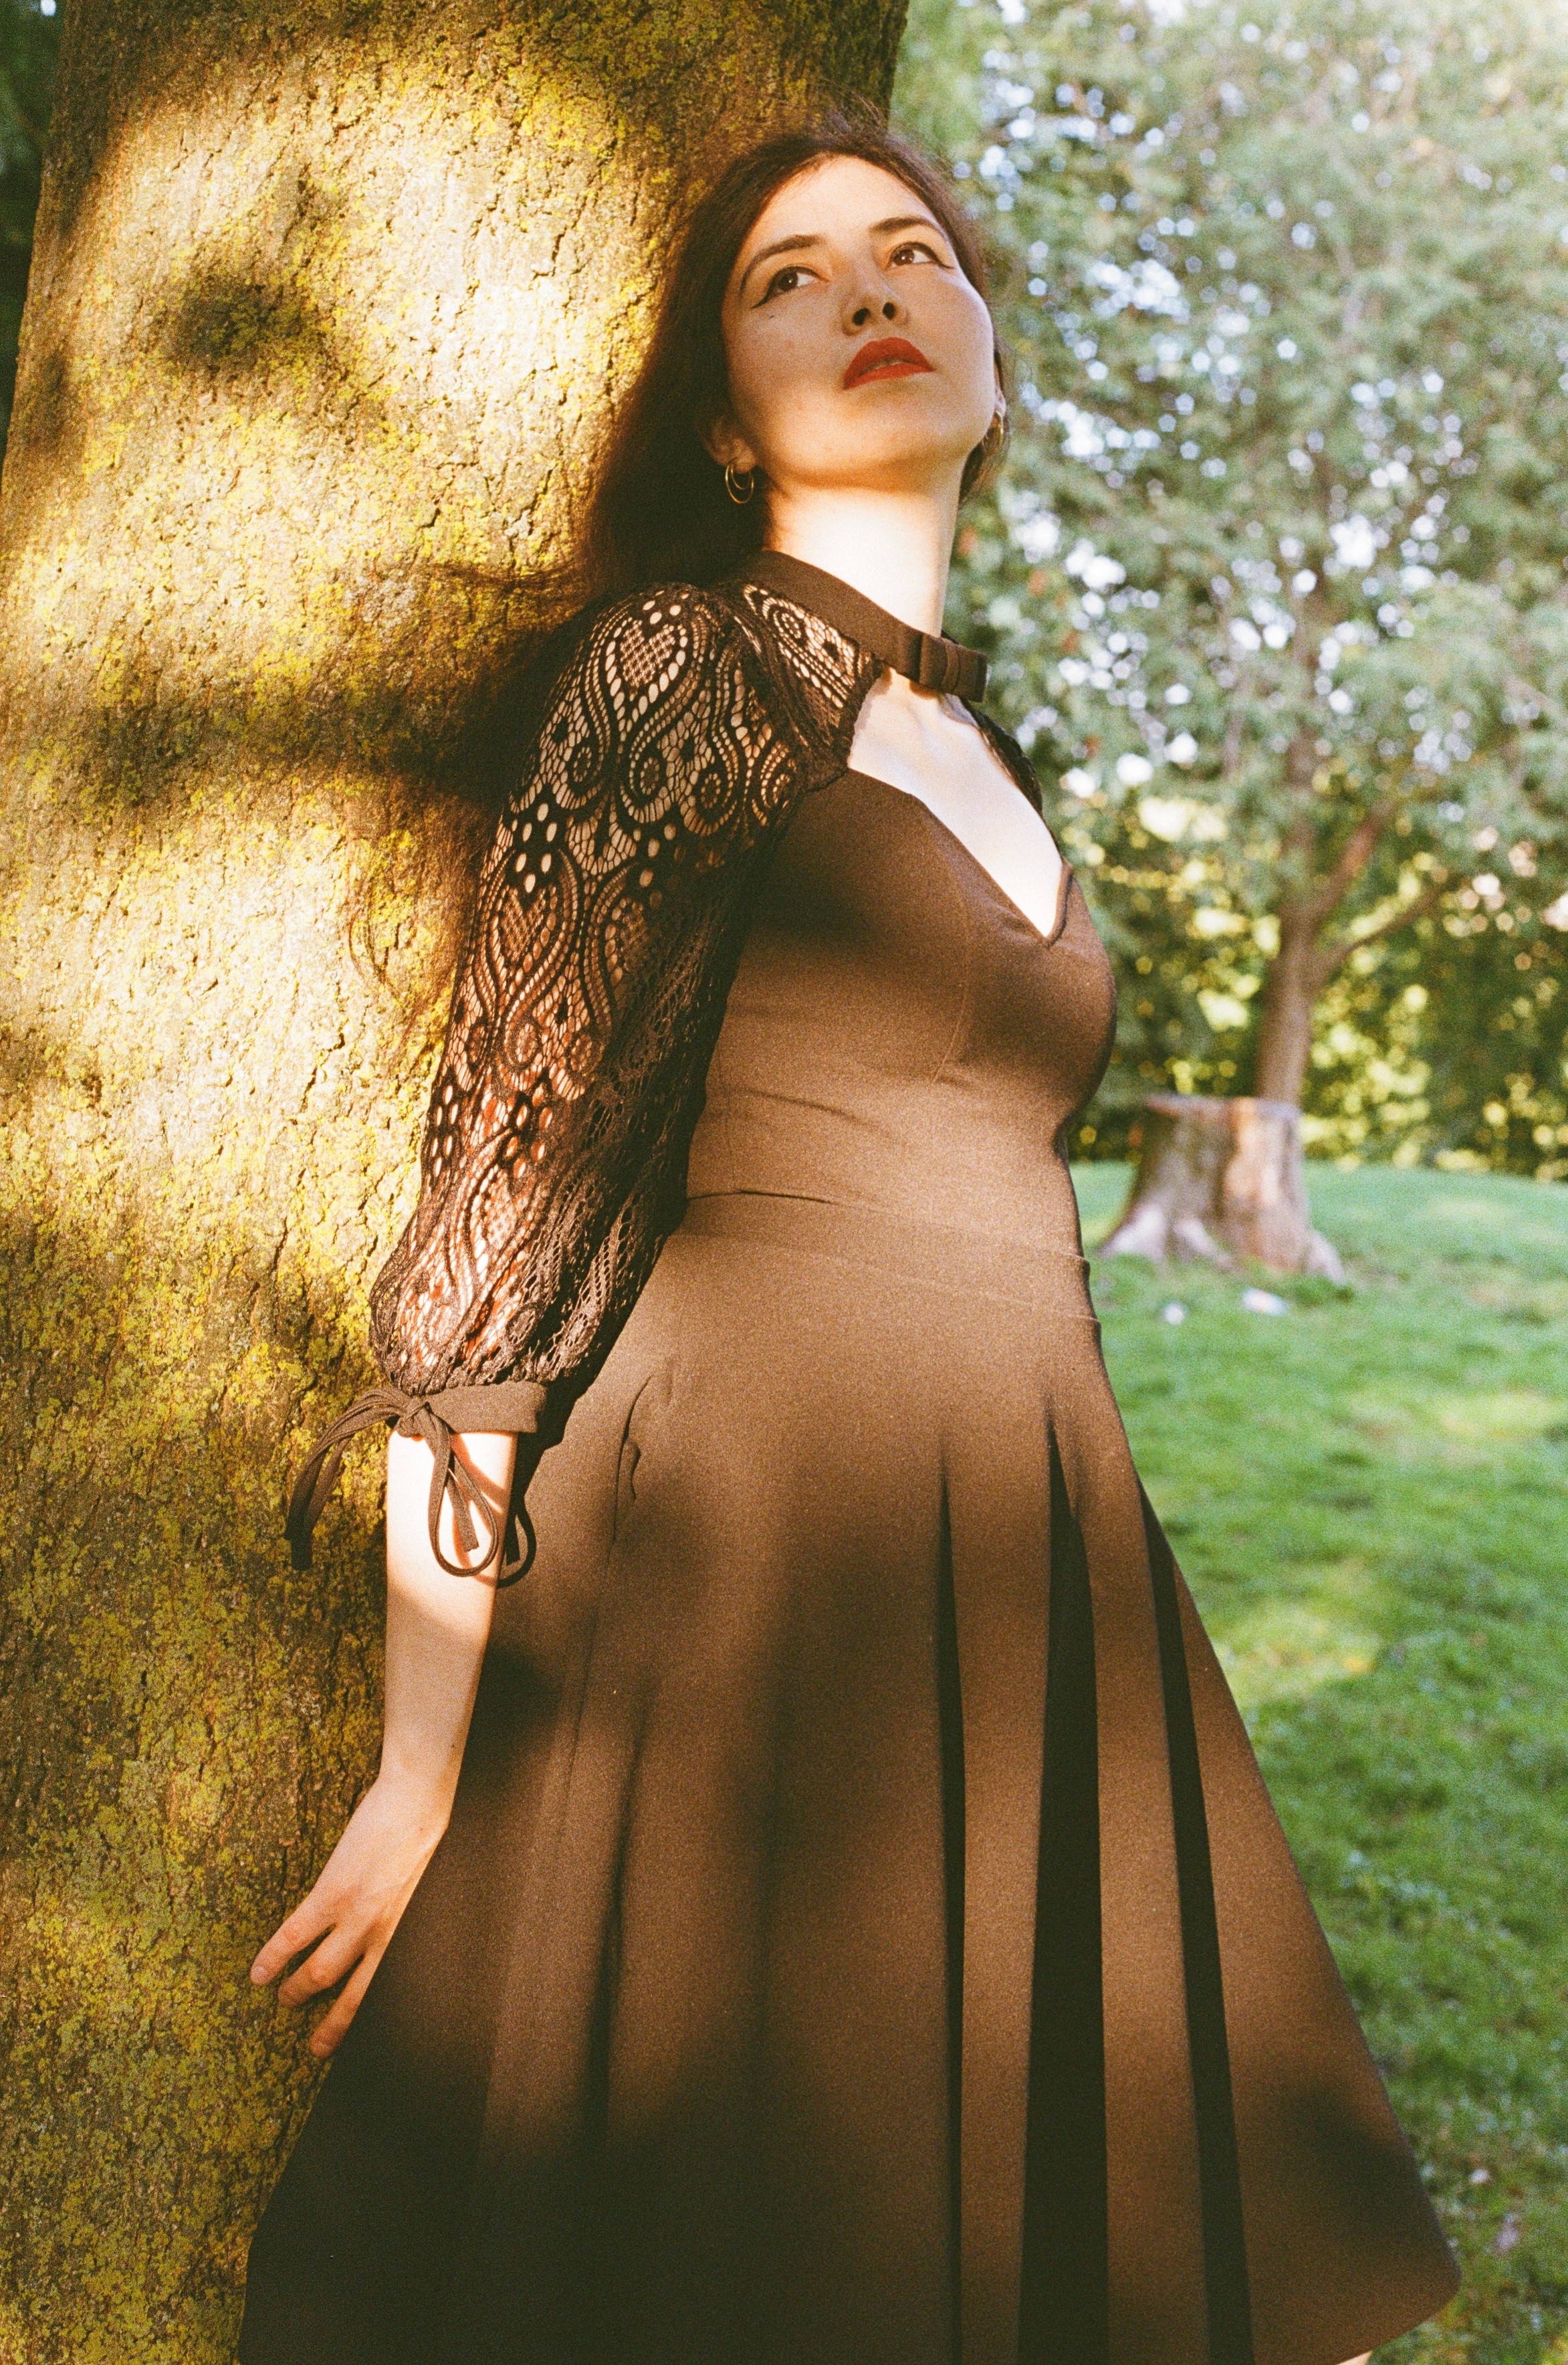 Beautiful woman with long black hair wearing a black dress, leaning against a tree, covered in patches of warm sunlight